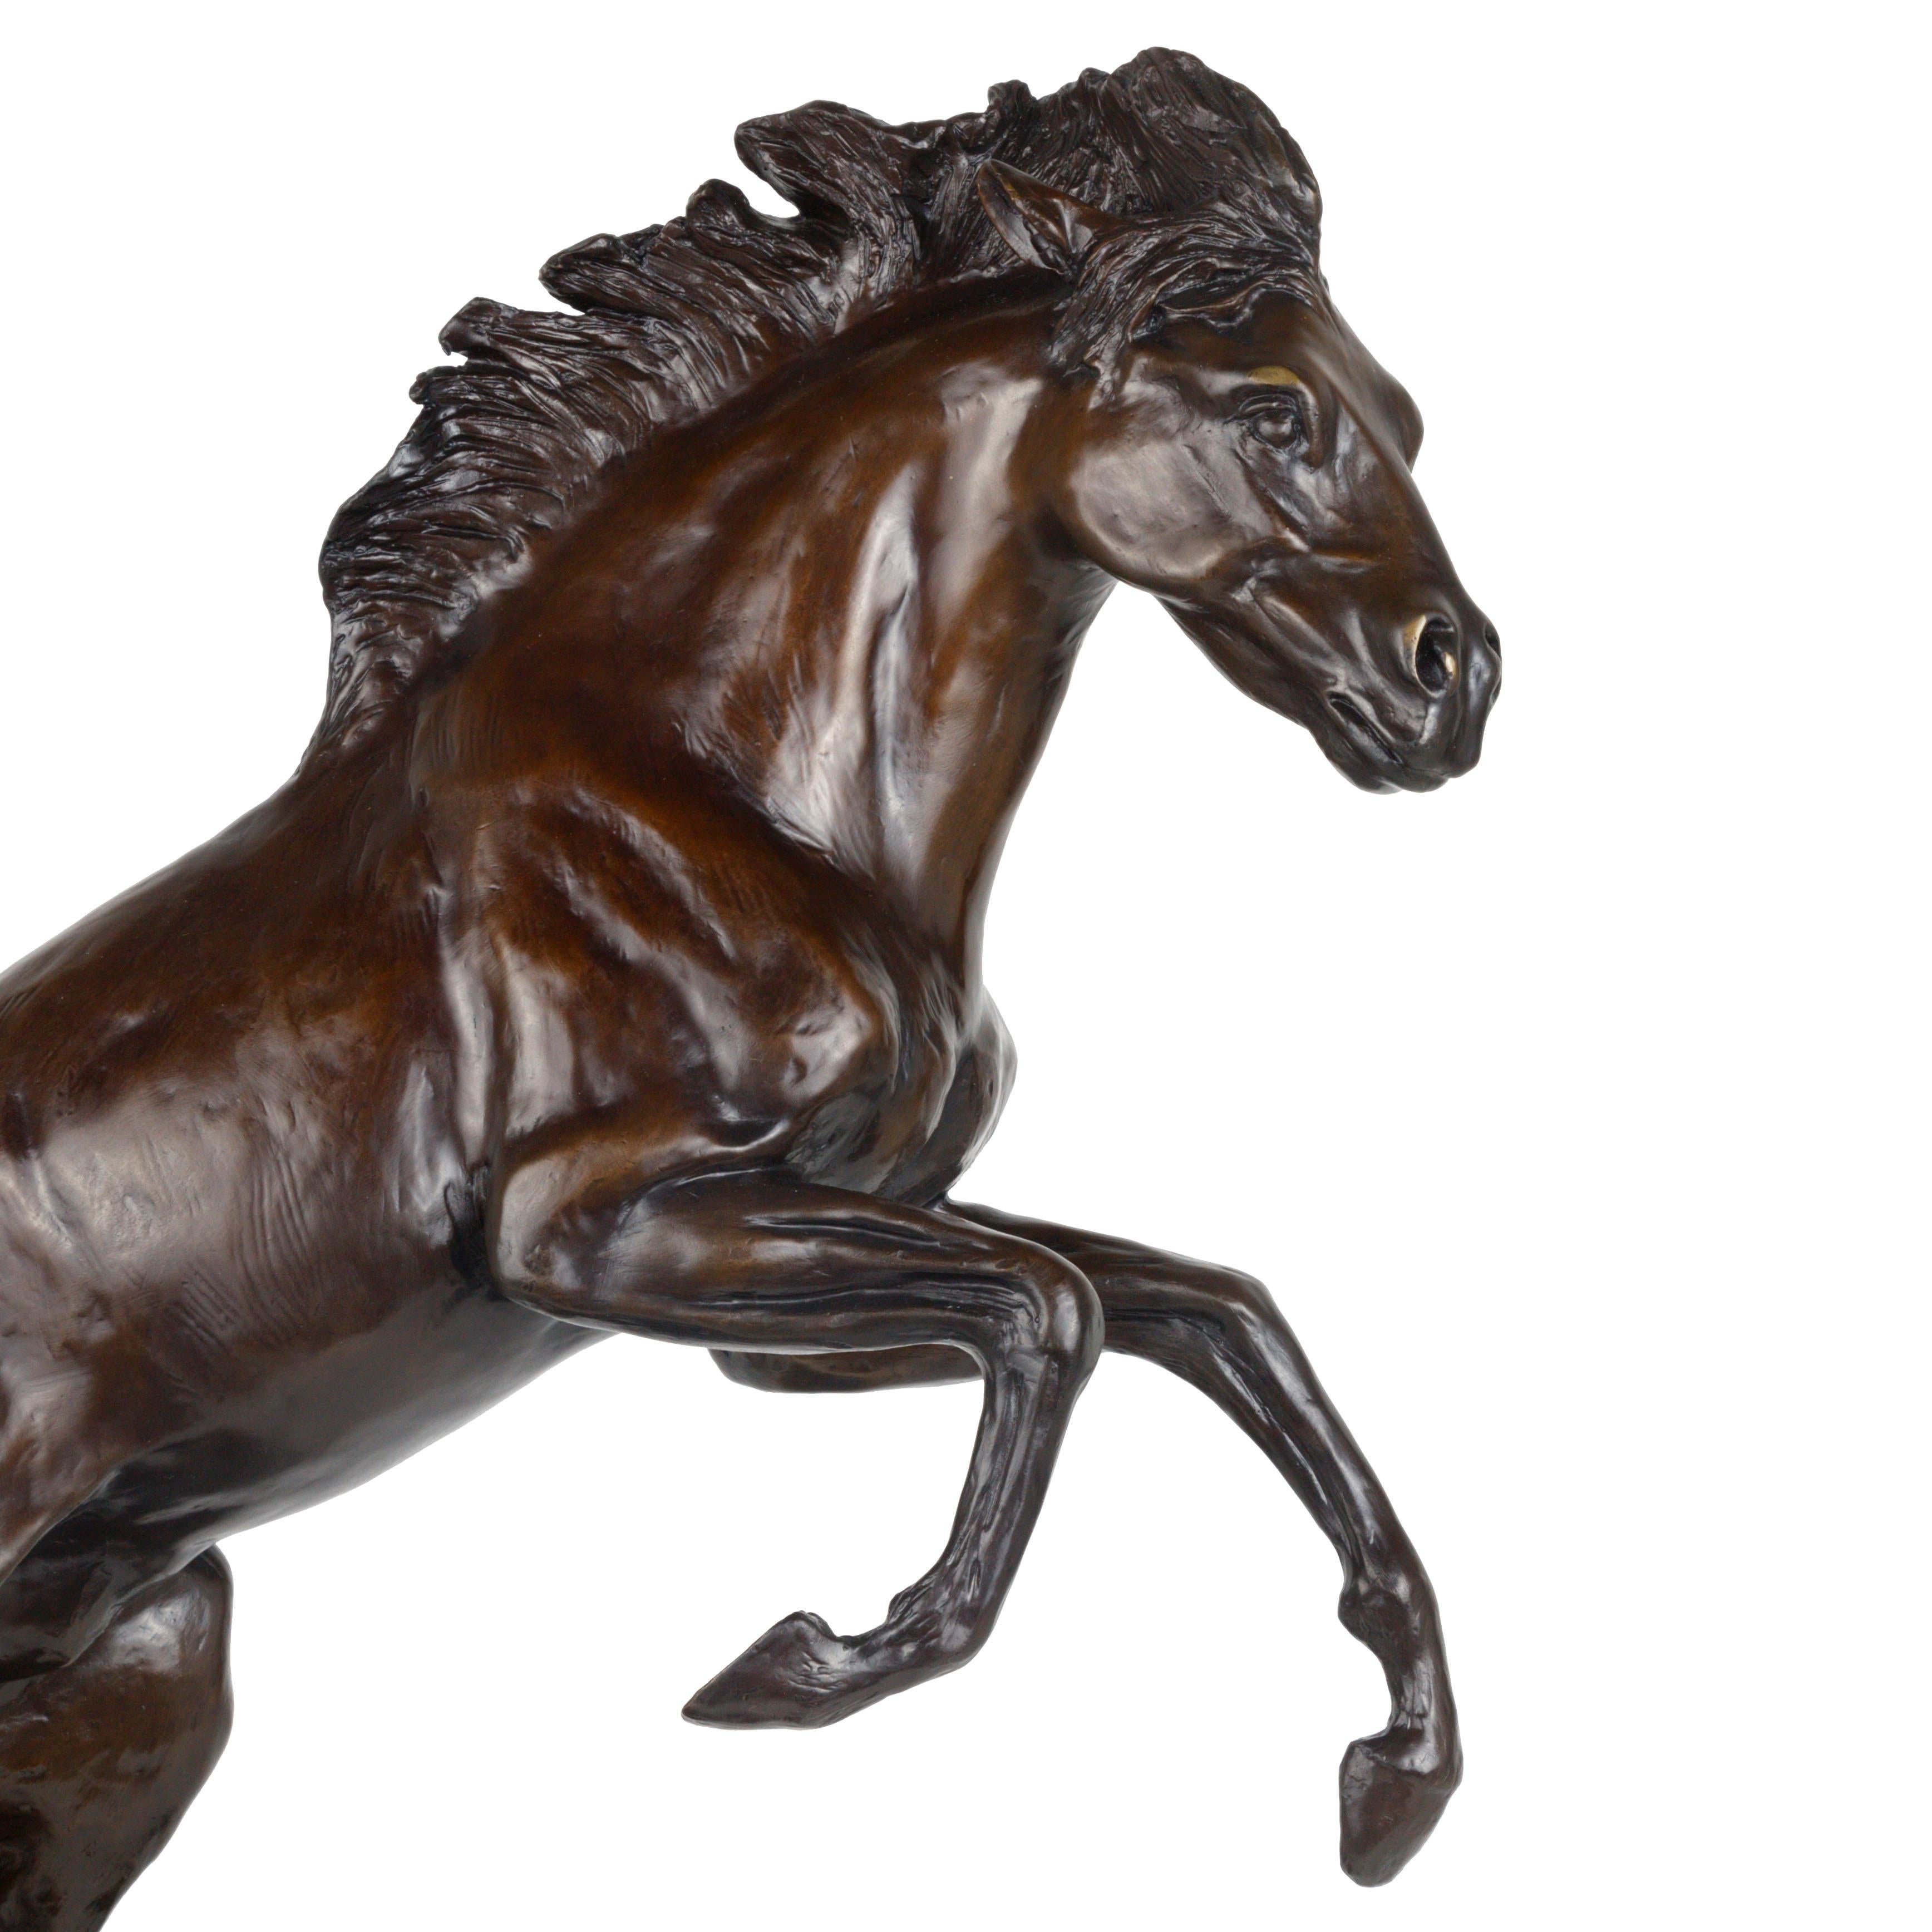 Bronze by Peter Darro (1917 - 1997). Limited edition casting by Cisco's, 3/50. Peter's studio was in Chicago and, unlike many, he was a painter since boyhood, later being recognized as a designated official American Field Hall of Fame artist, and a